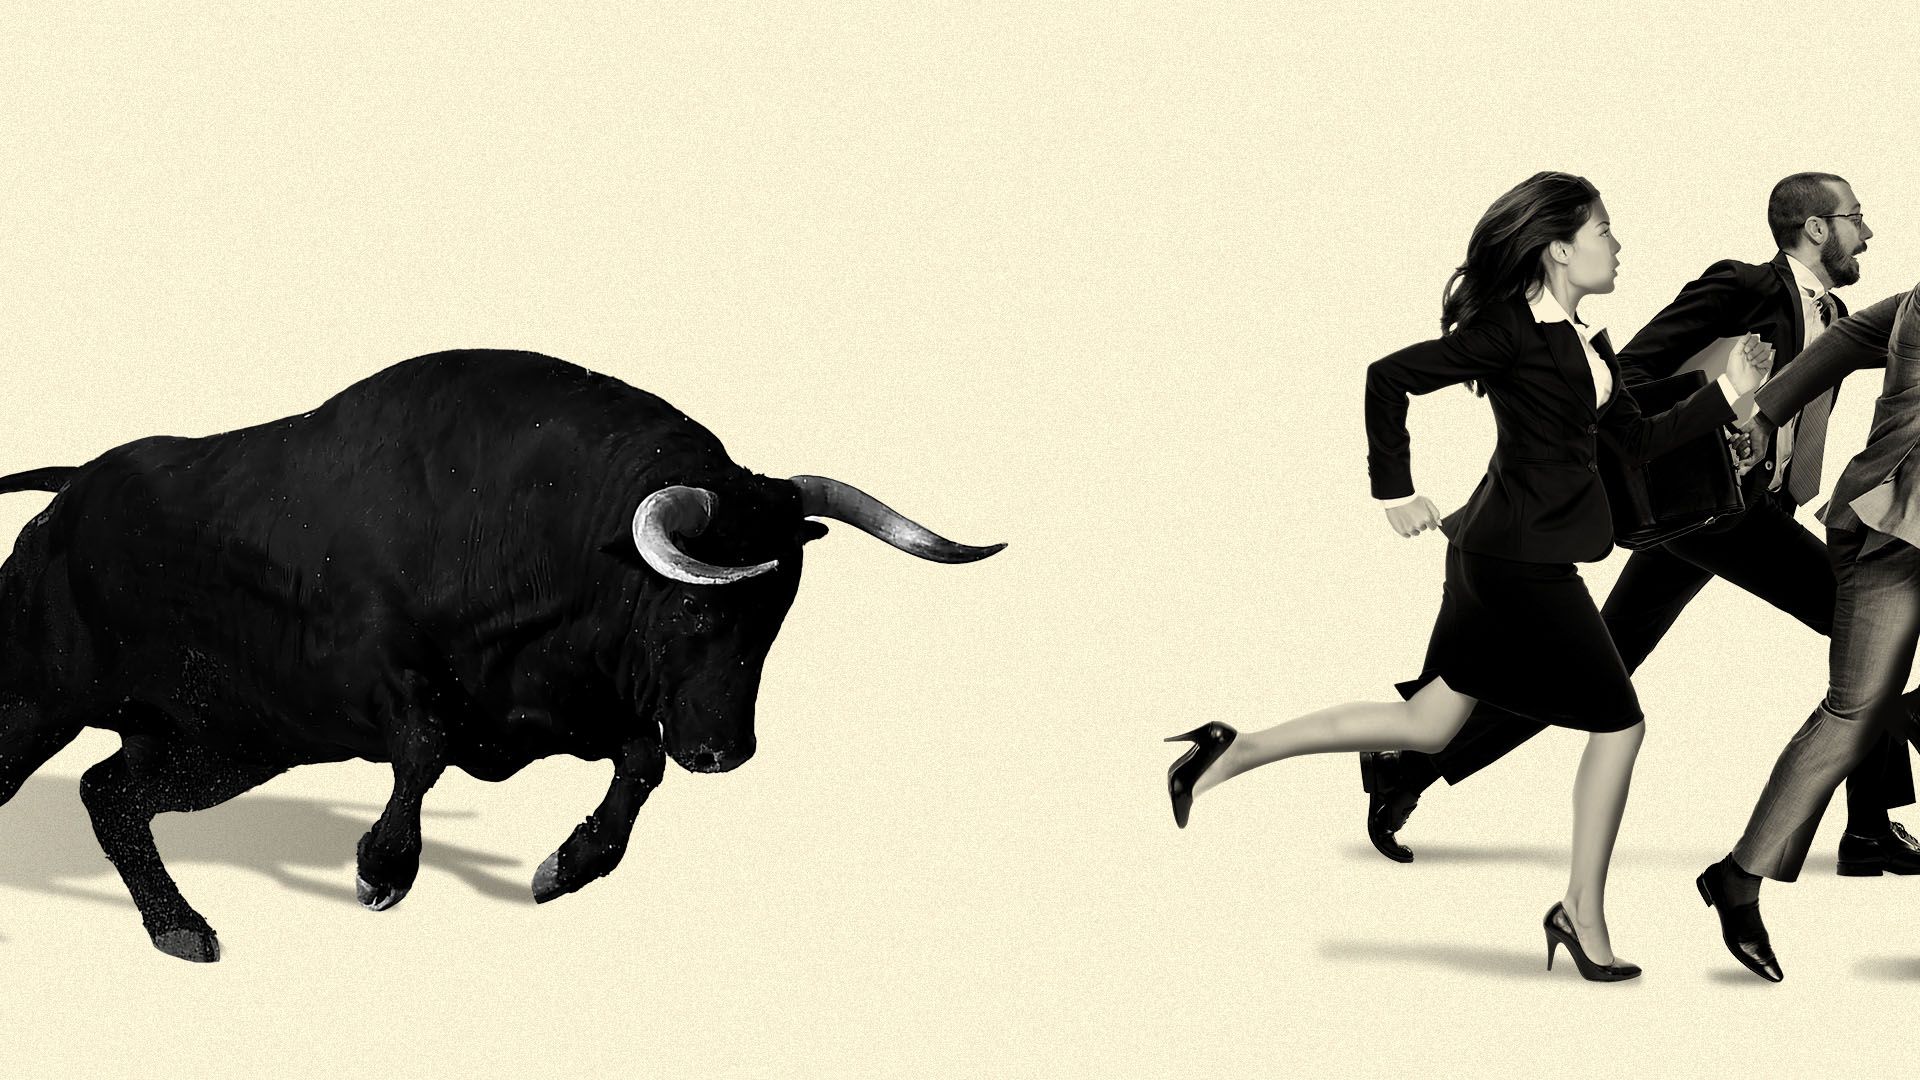 Illustration of a bull chasing a group of business people